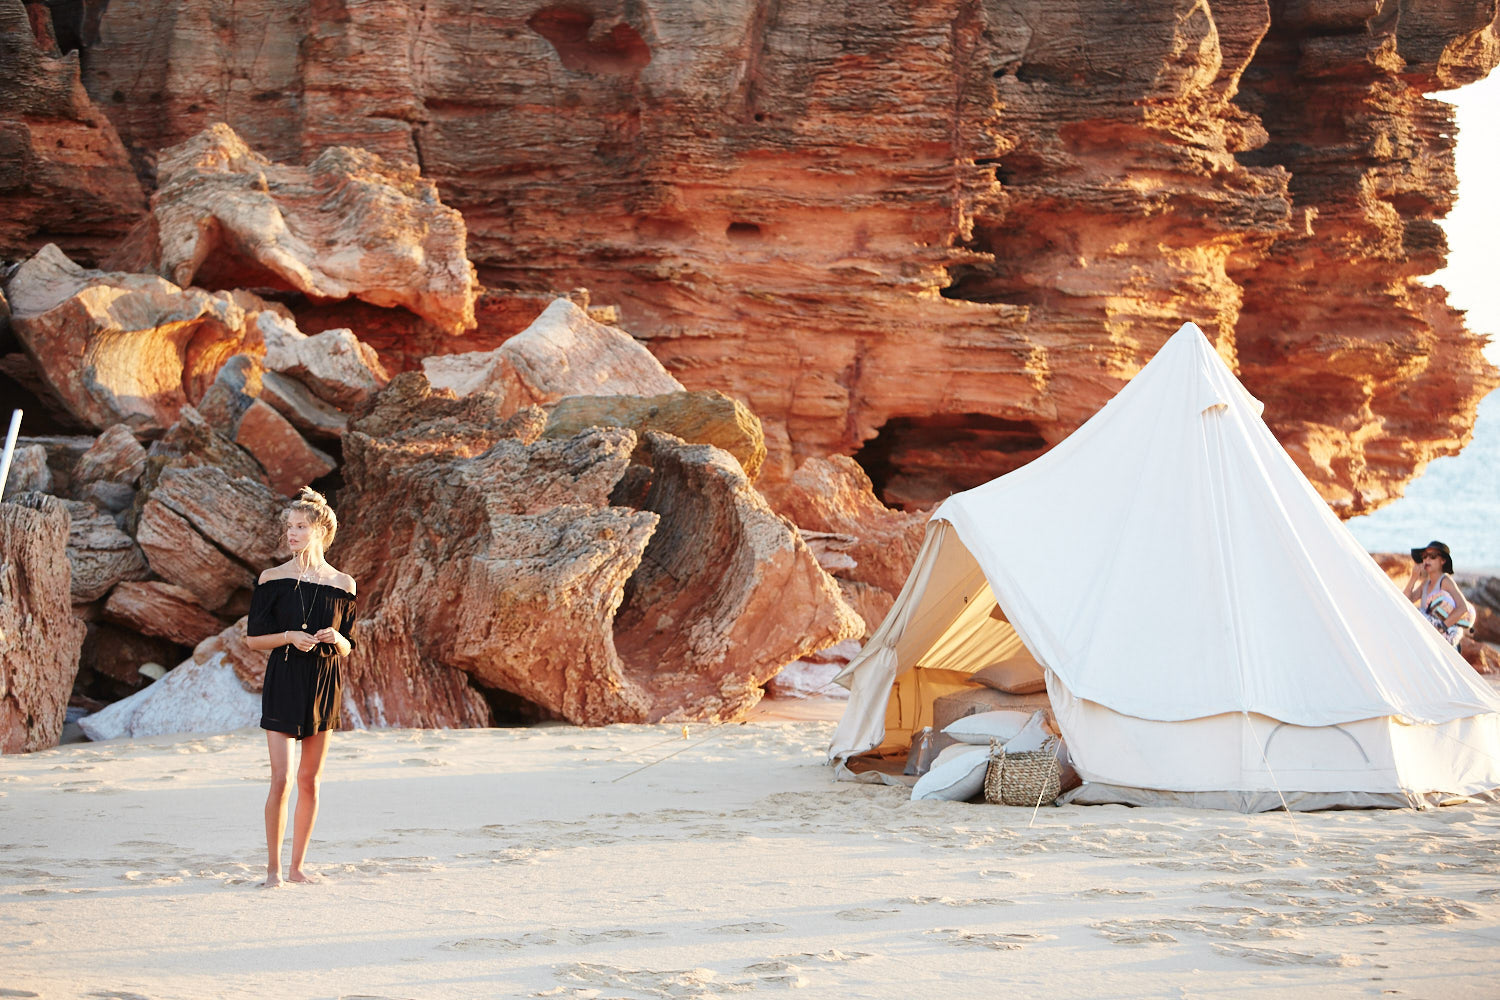 Alena on the set of our Broome shoot, glamping at Eco Beach